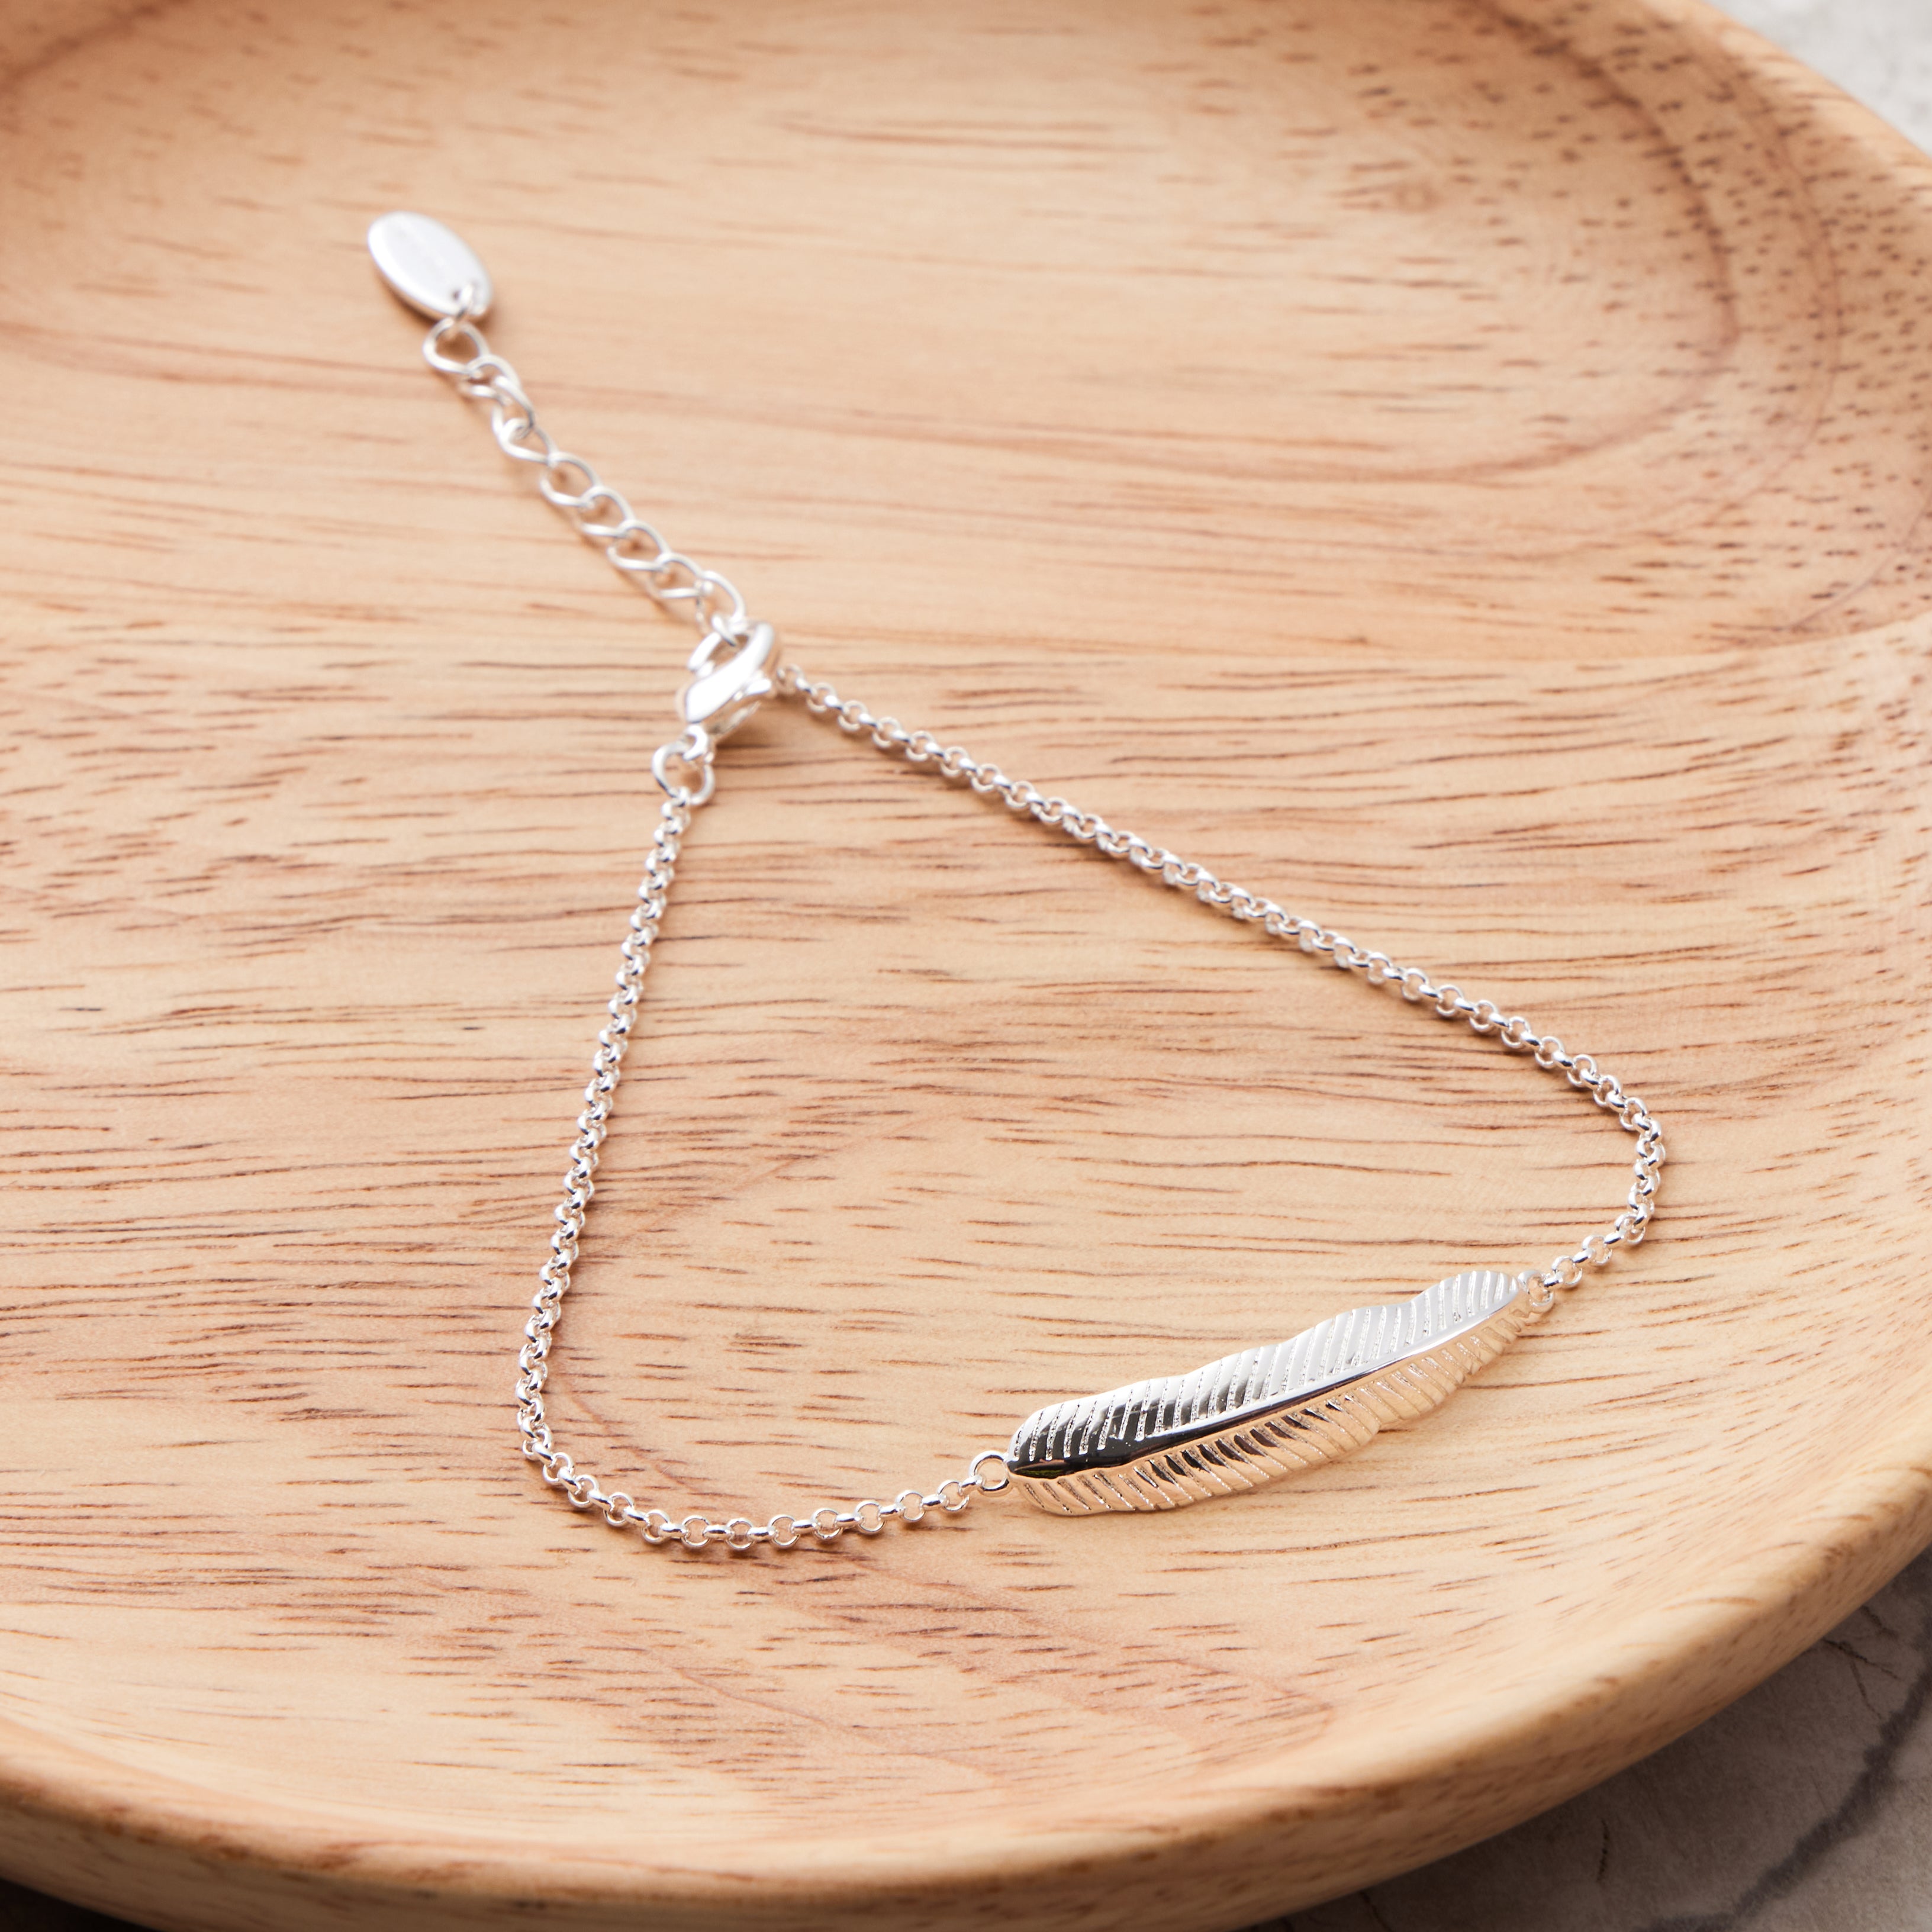 Silver Plated Feather Bracelet